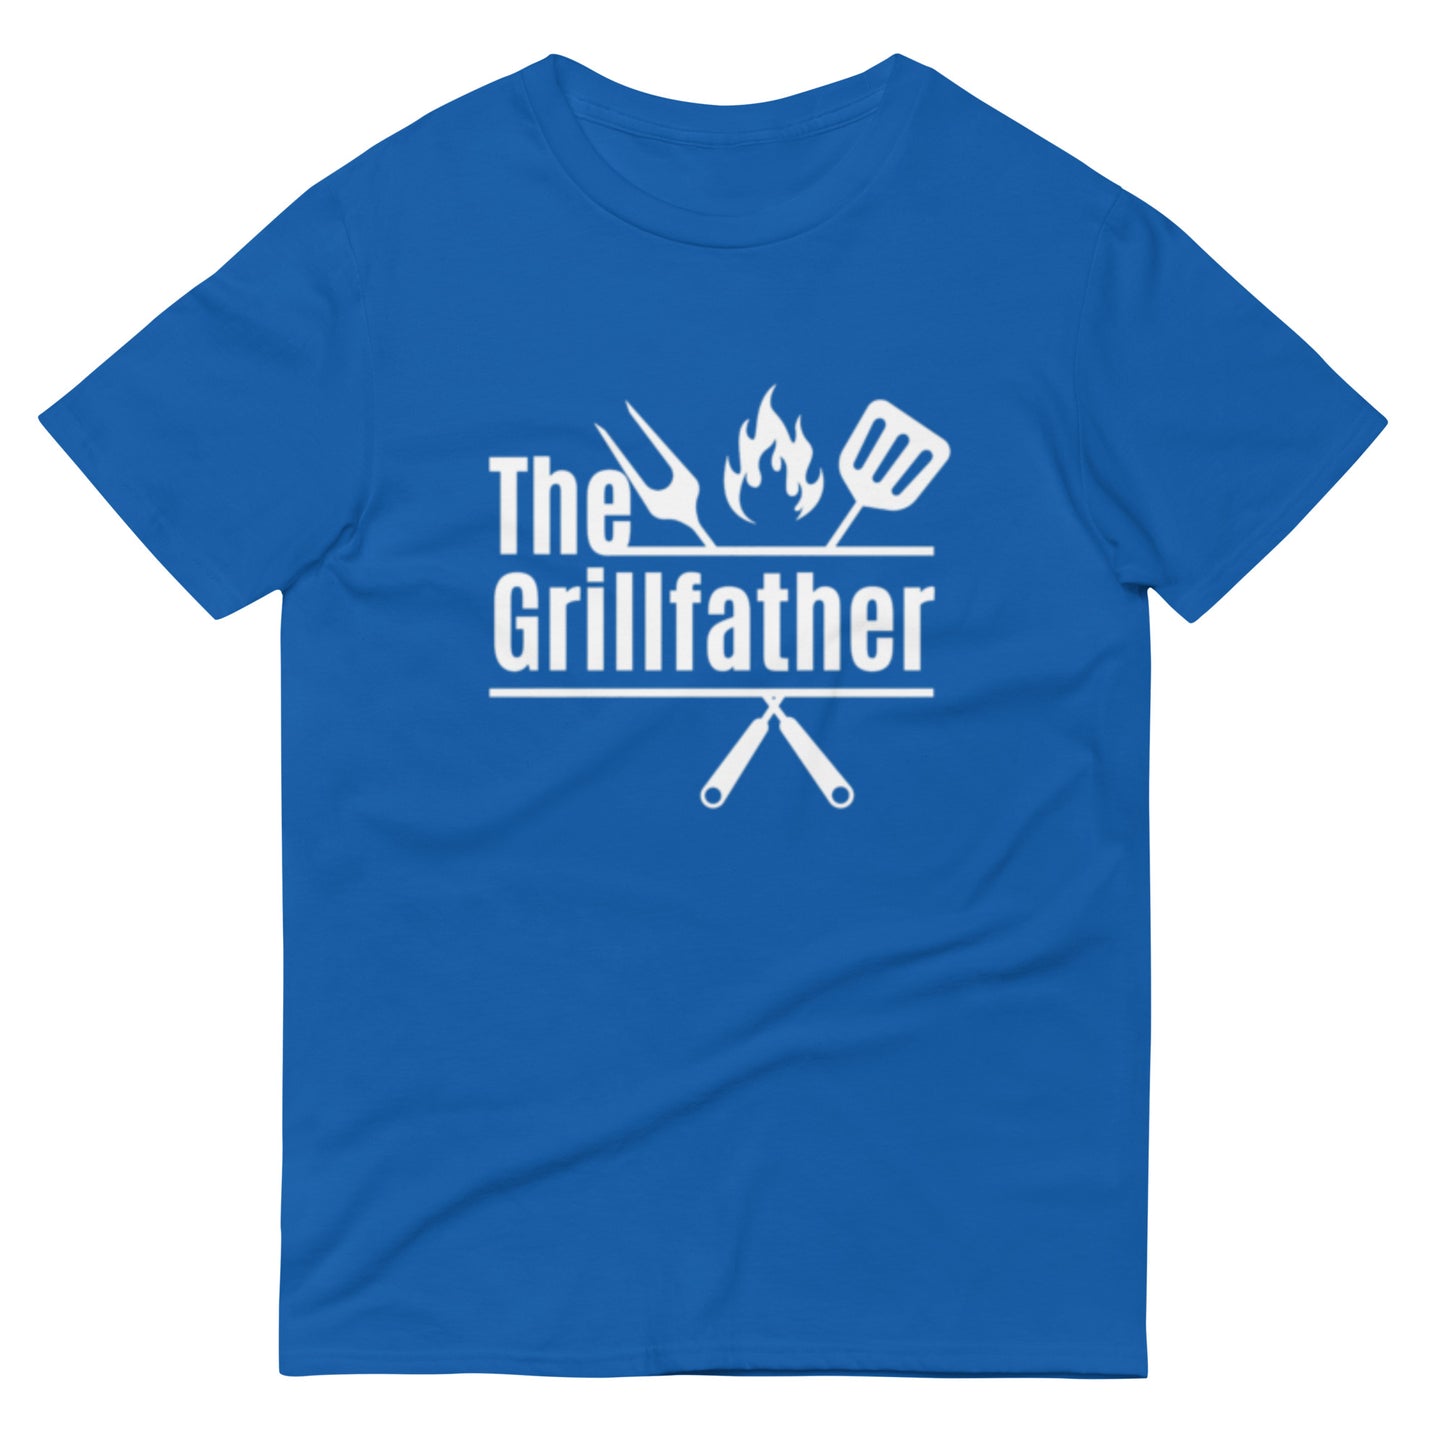 The Grill Father Short-Sleeve T-Shirt